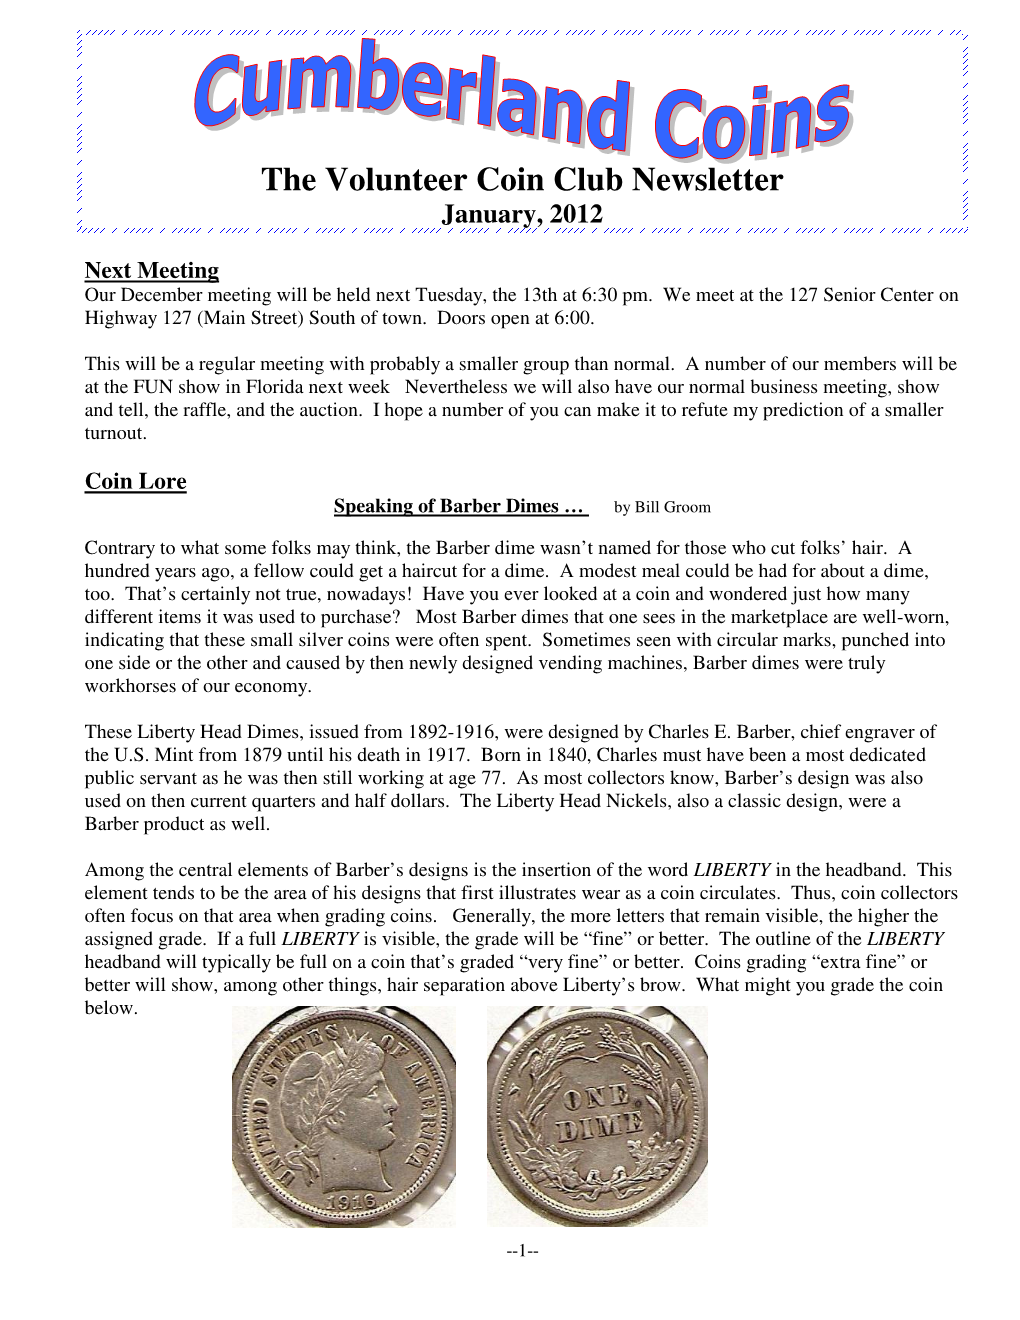 The Volunteer Coin Club Newsletter January, 2012